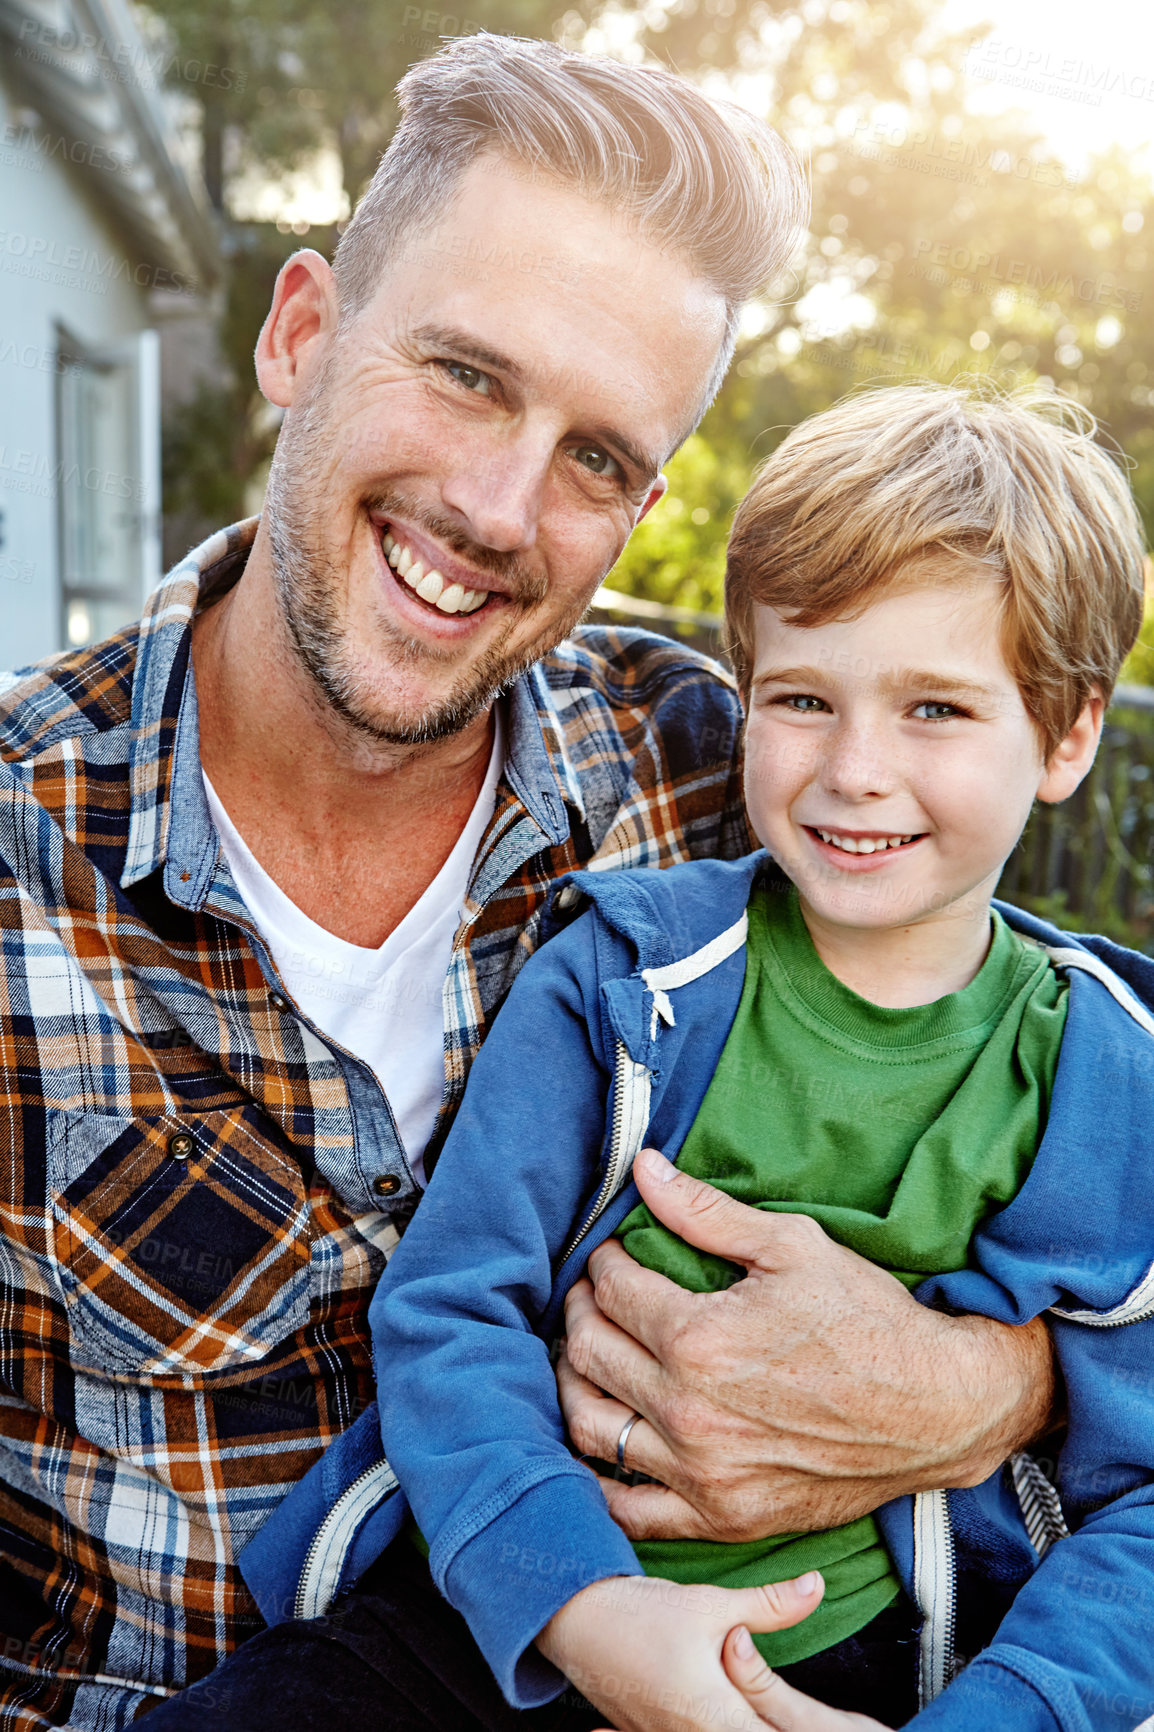 Buy stock photo Shot of a happy father and son spending time outdoors